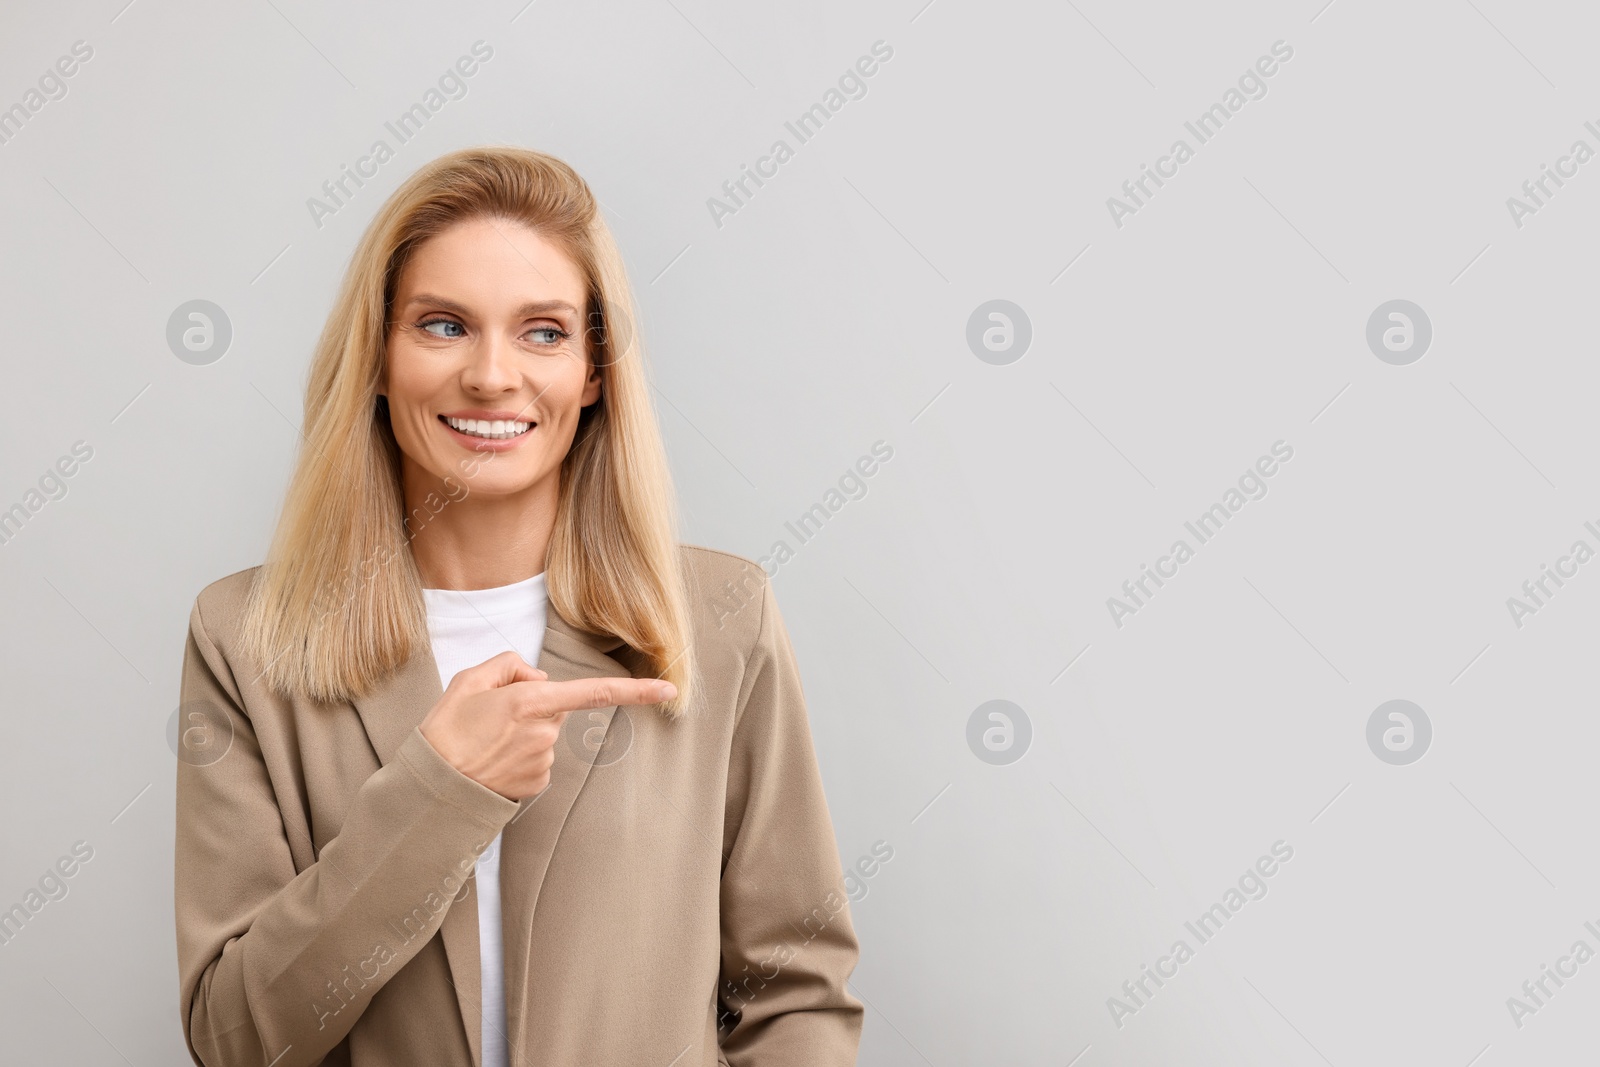 Photo of Portrait of smiling middle aged businesswoman pointing at something on light grey background. Space for text